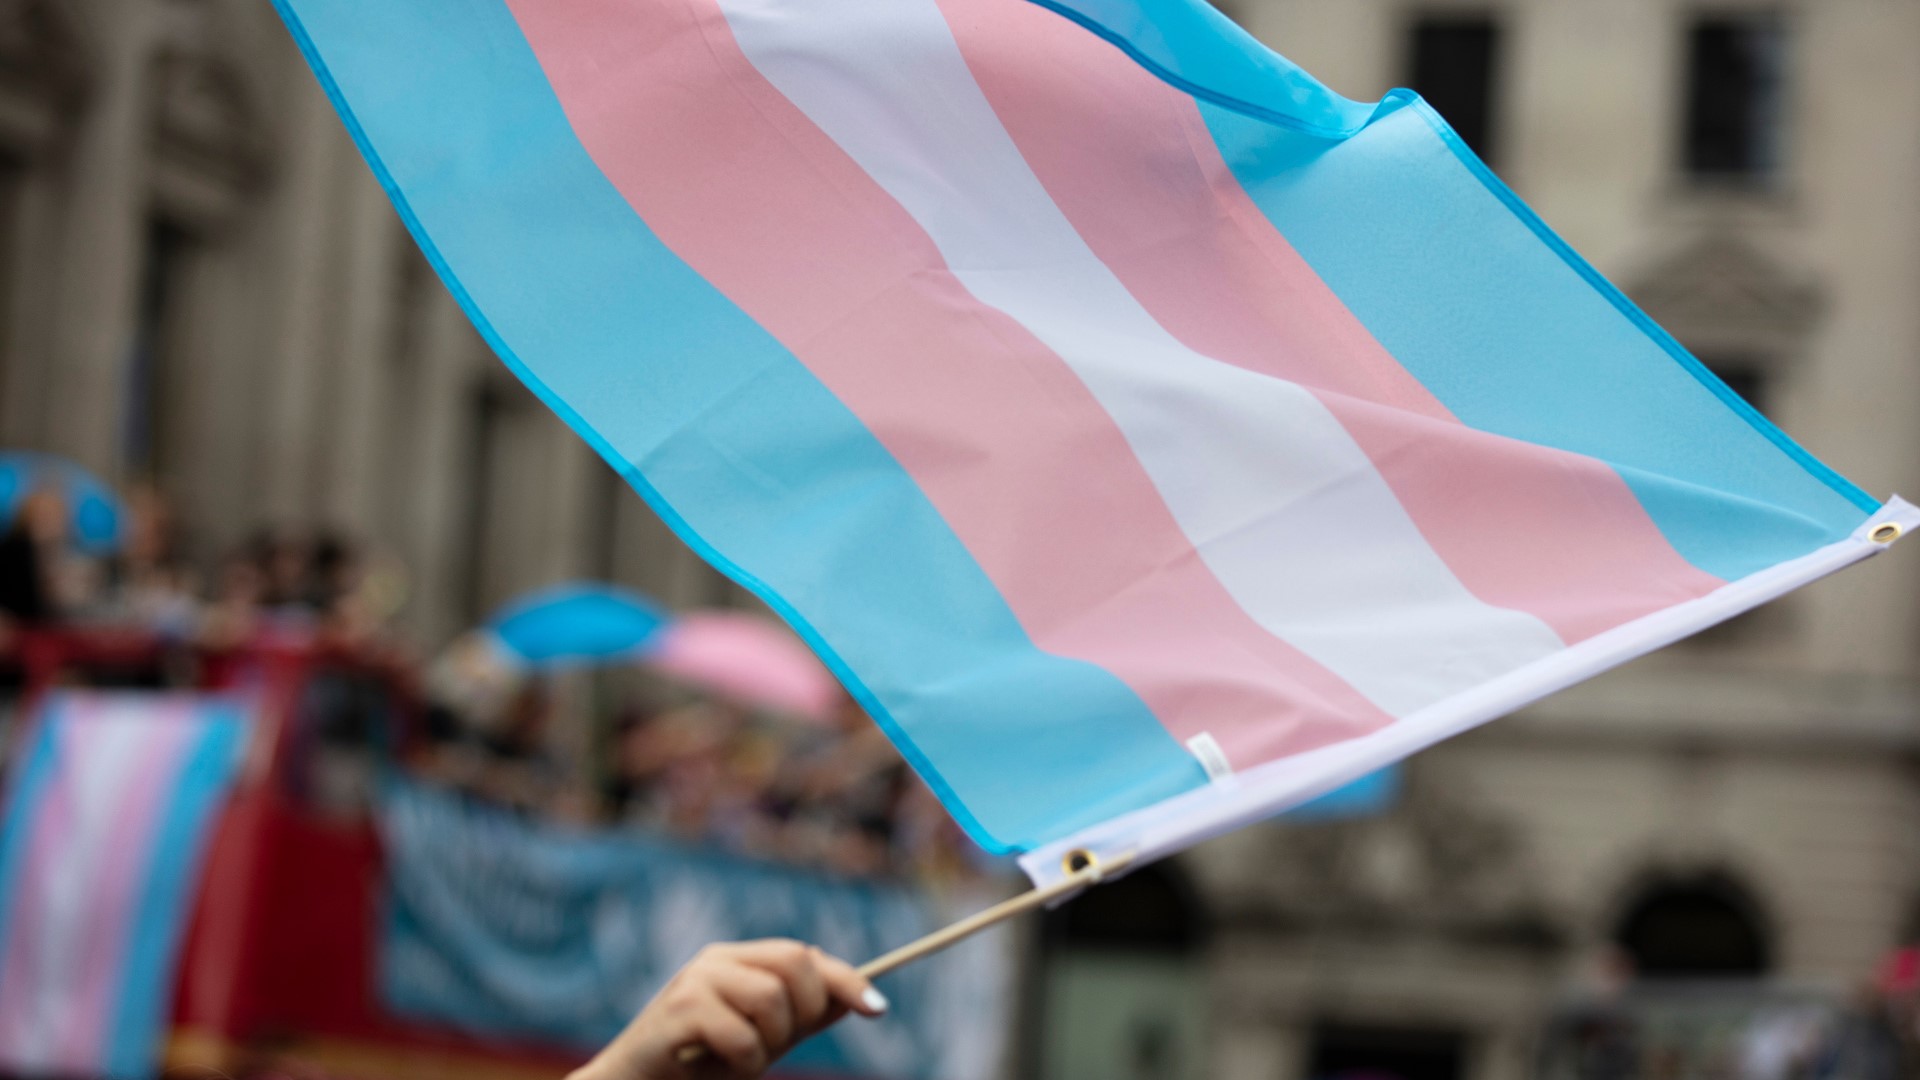 The amended Senate Bill 150 has language from other bills that would impact trans youth, including banning gender-affirming care.